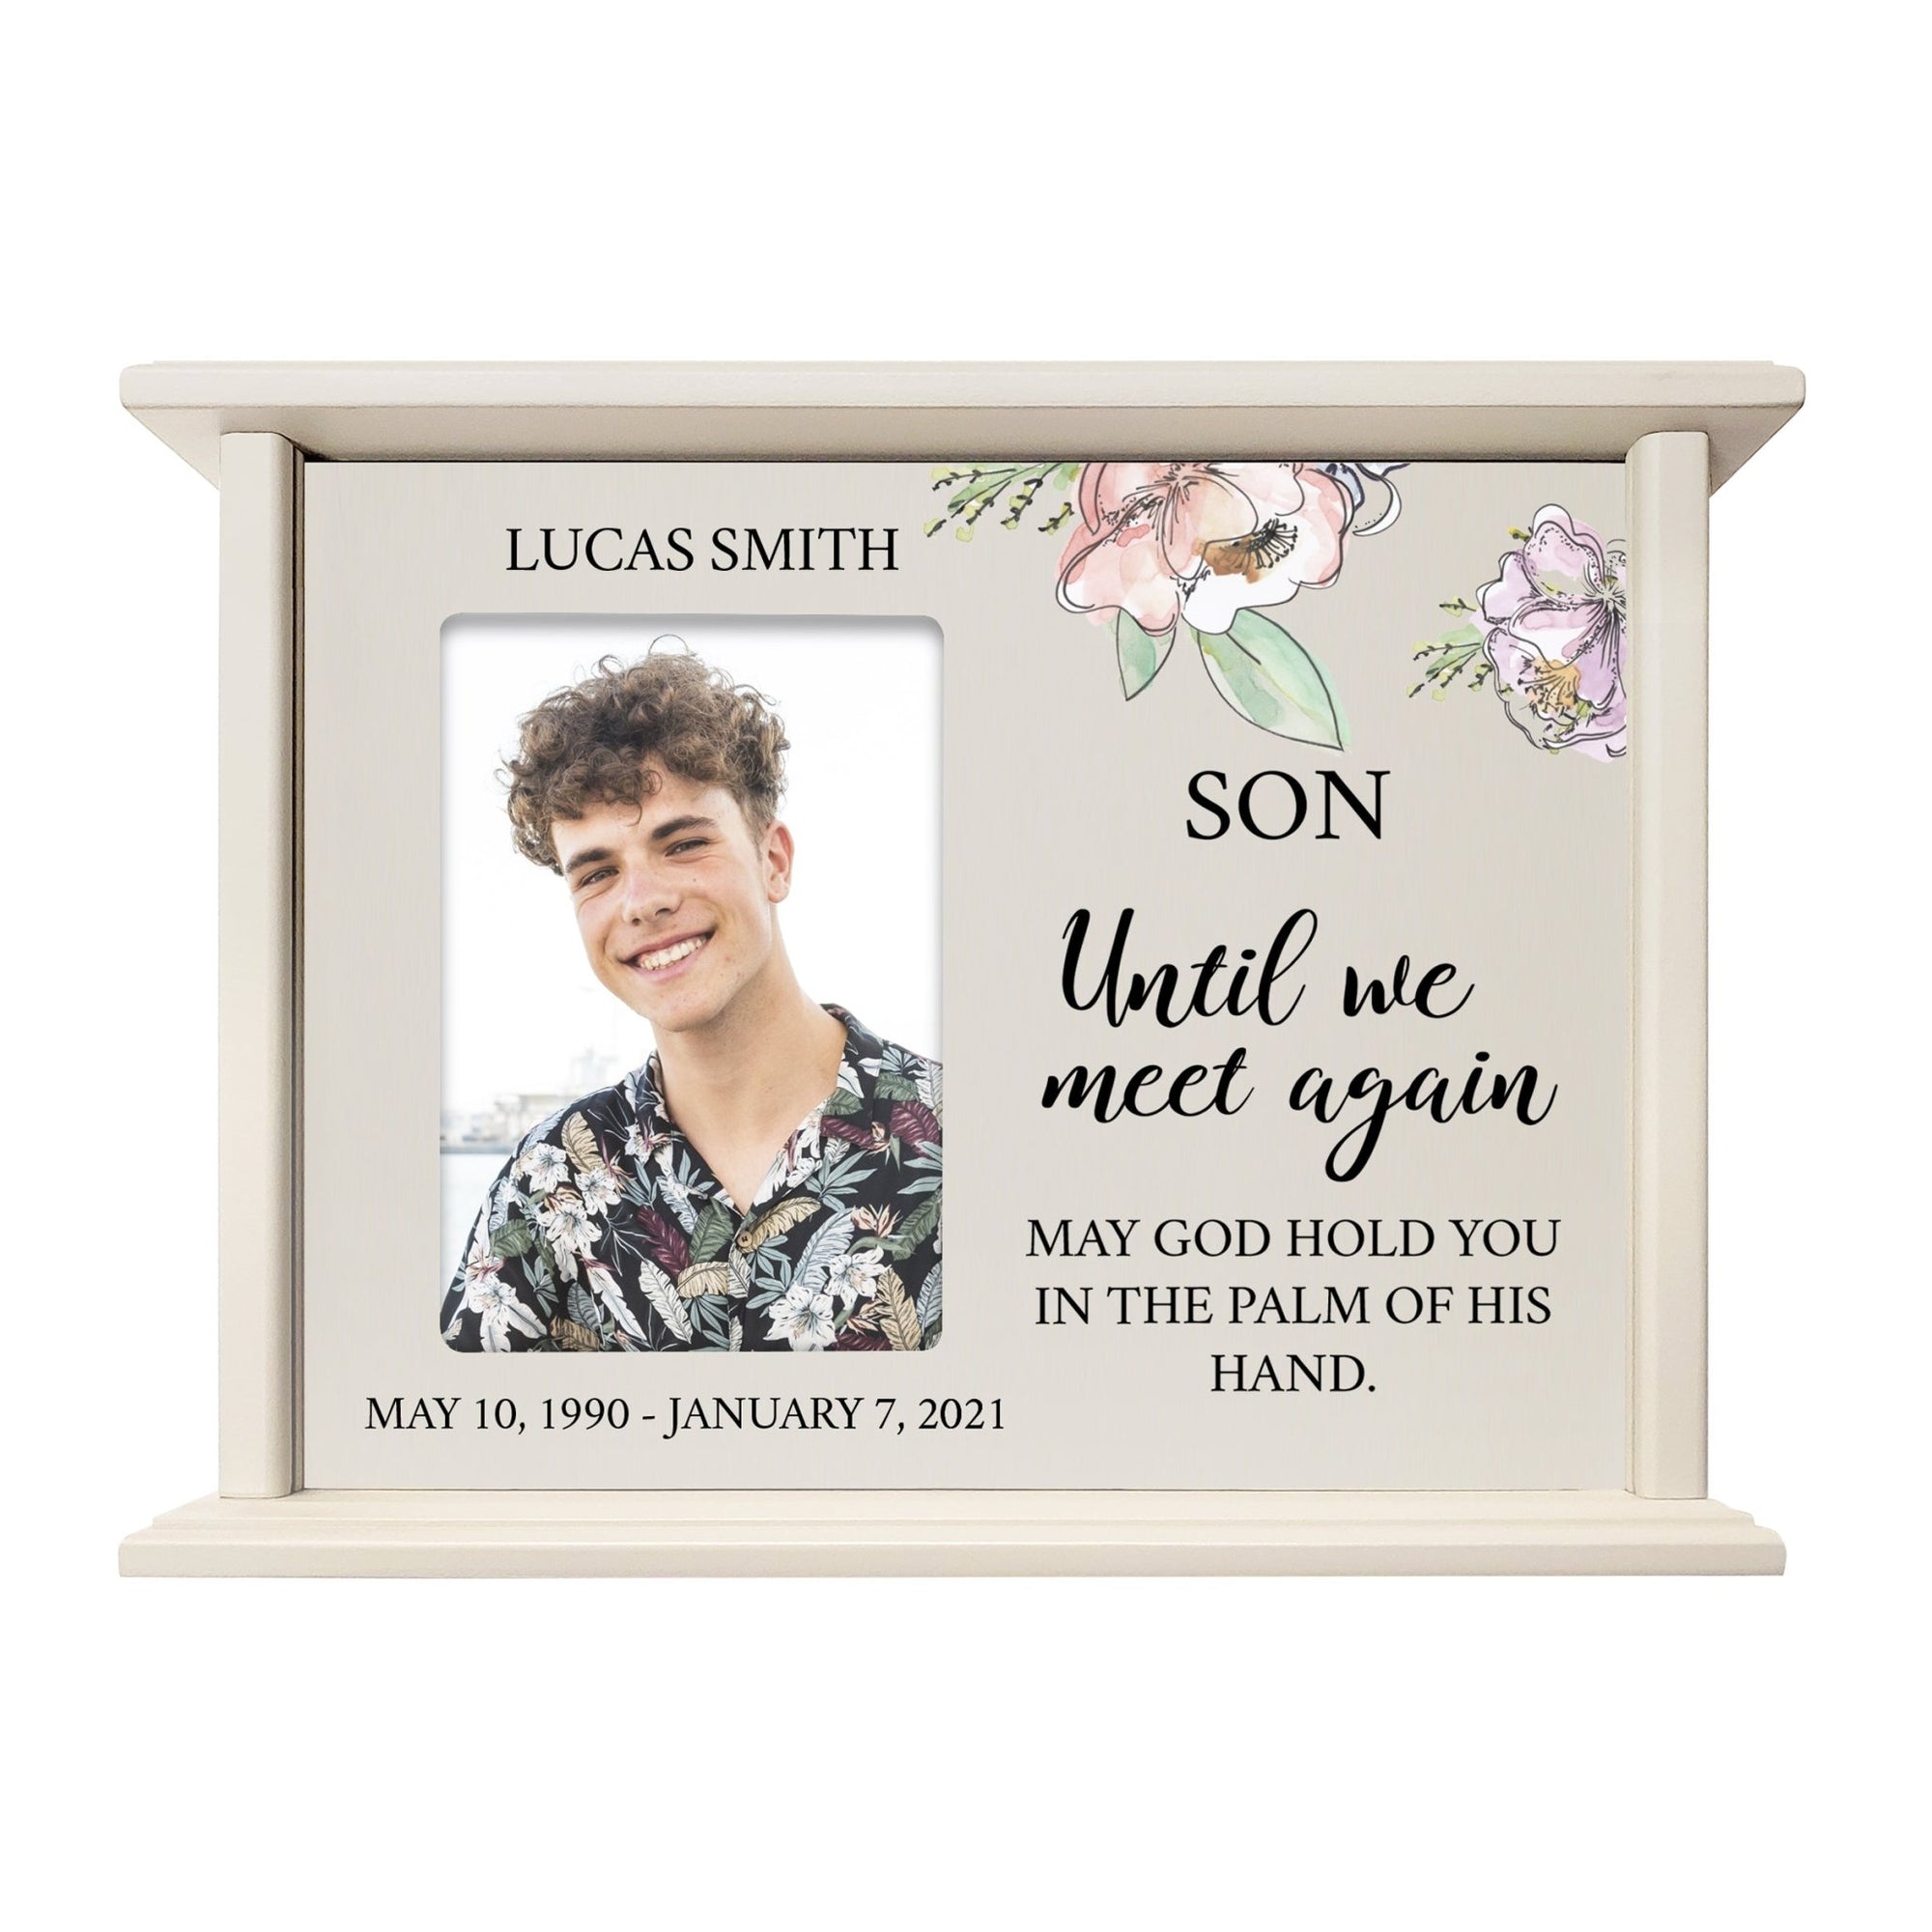 Personalized Memorial Cherry Wood 12 x 4.5 x 9 Cremation Urn Box with Picture Frame holds 200 cu in of Human Ashes and 4x6 Photo - Until We Meet Again (Ivory) - LifeSong Milestones